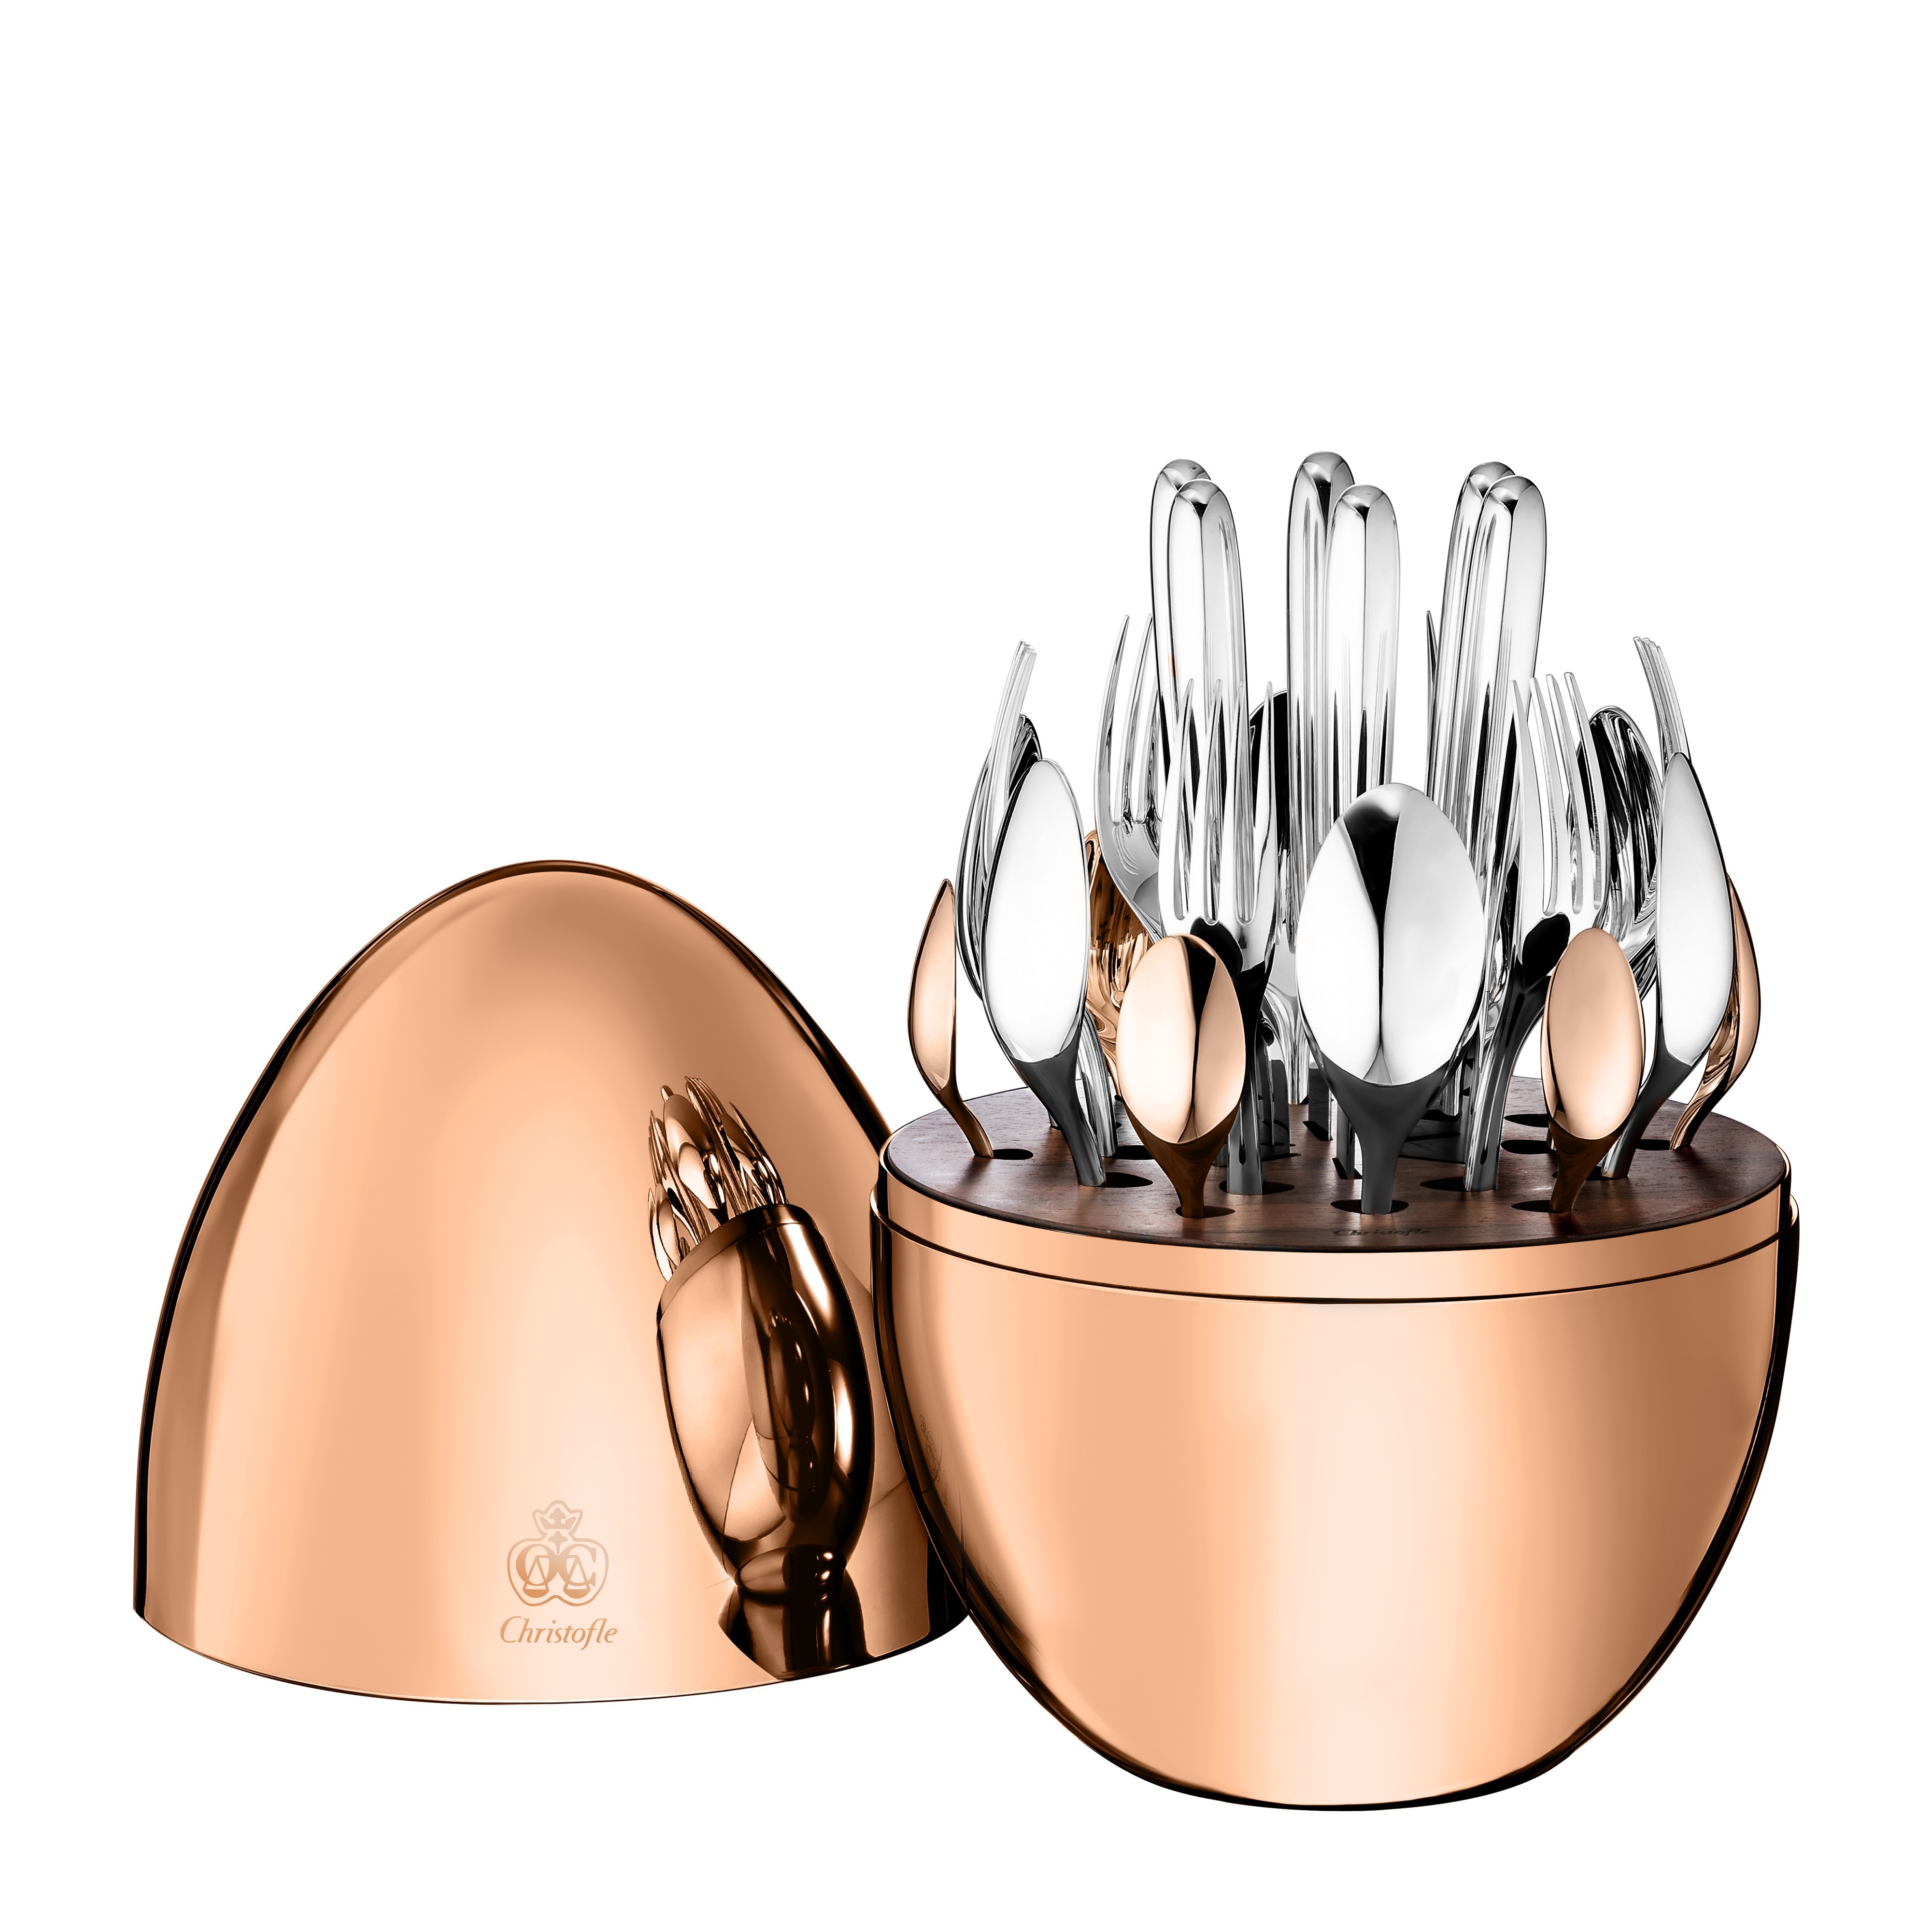 Christofle. Mood by Christofle is a 24-piece flatware set for six in a combination of silver and 18ct pink gold, HK$17,500